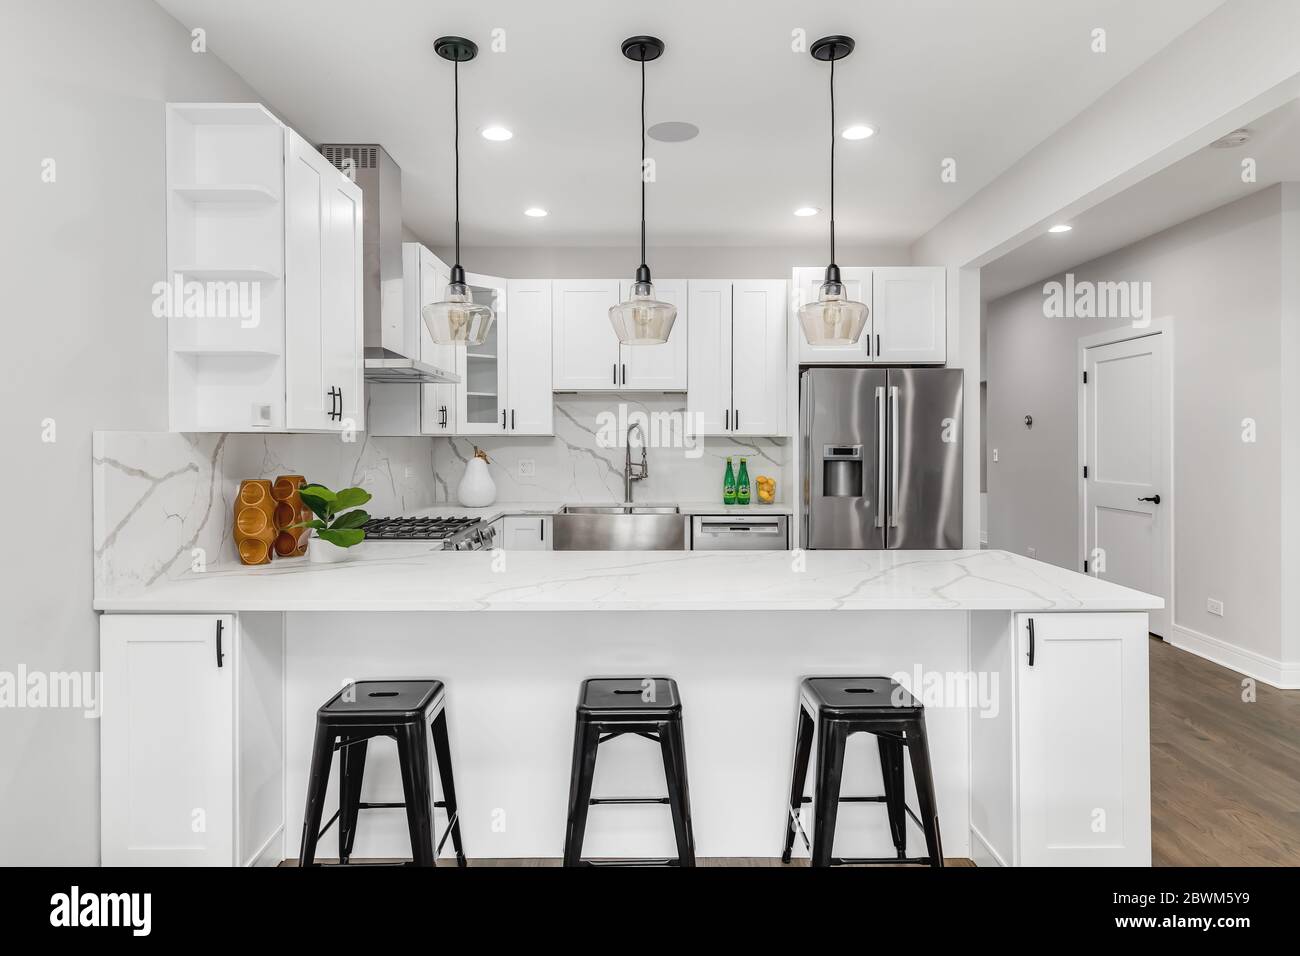 A new, modern all white kitchen with black lights hanging from the ceiling and black bar stools sitting at the counter top for an eating area. Stock Photo